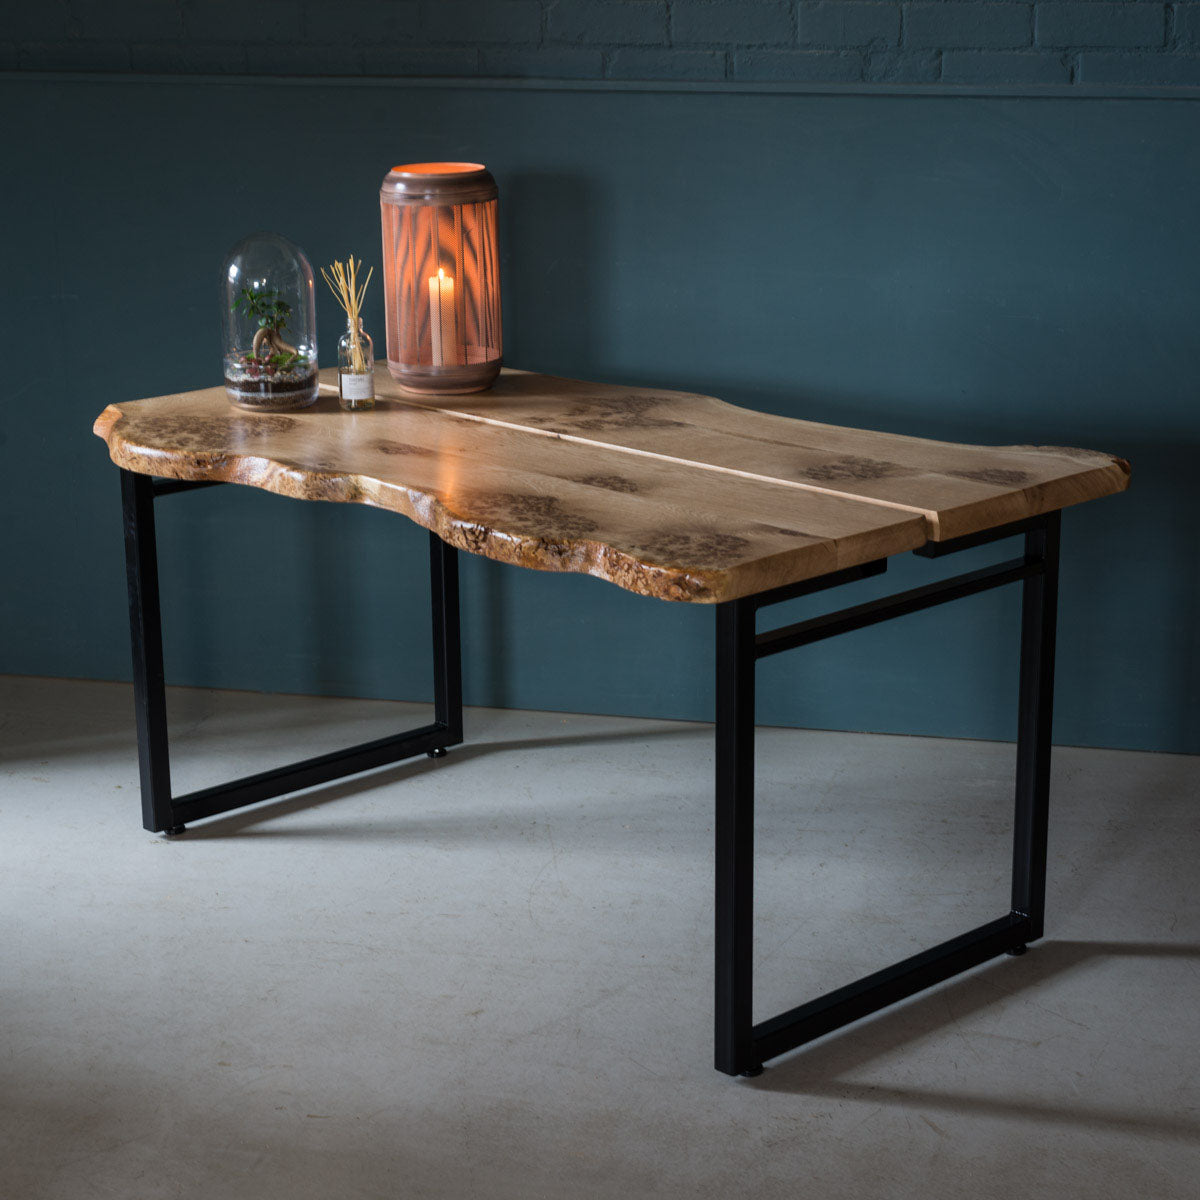 An image of the Live Edge Oak Table, Opia product available from Koda Studios